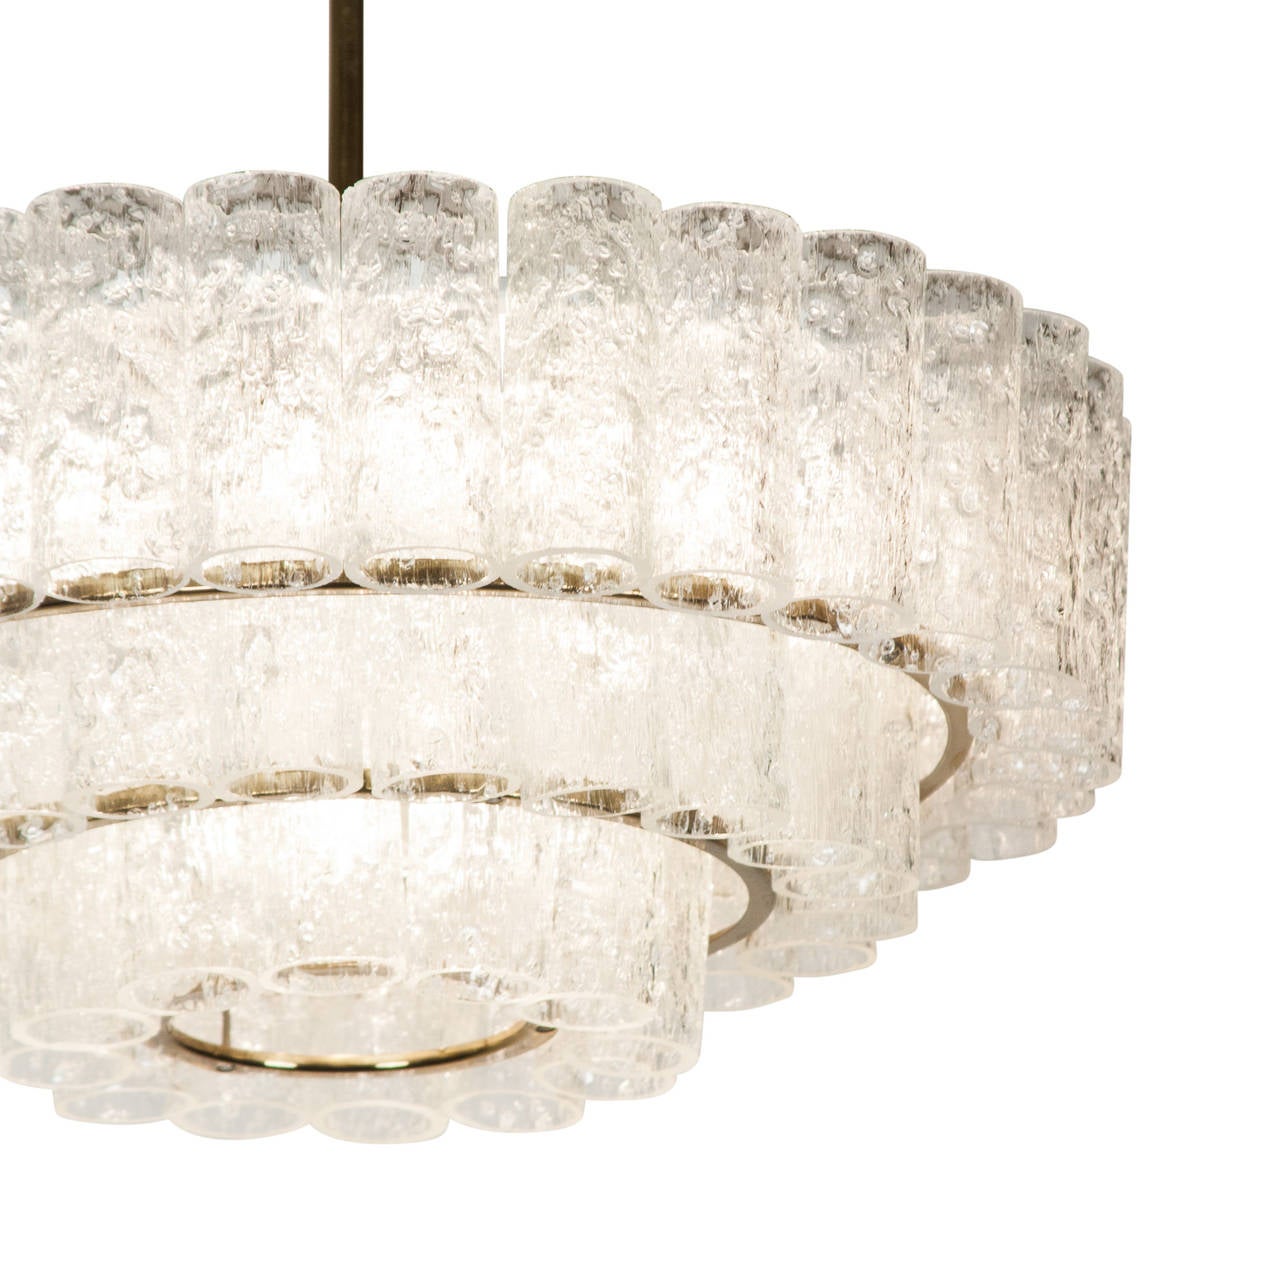 Elegant Doria Glass Chandelier In Excellent Condition For Sale In Brooklyn, NY